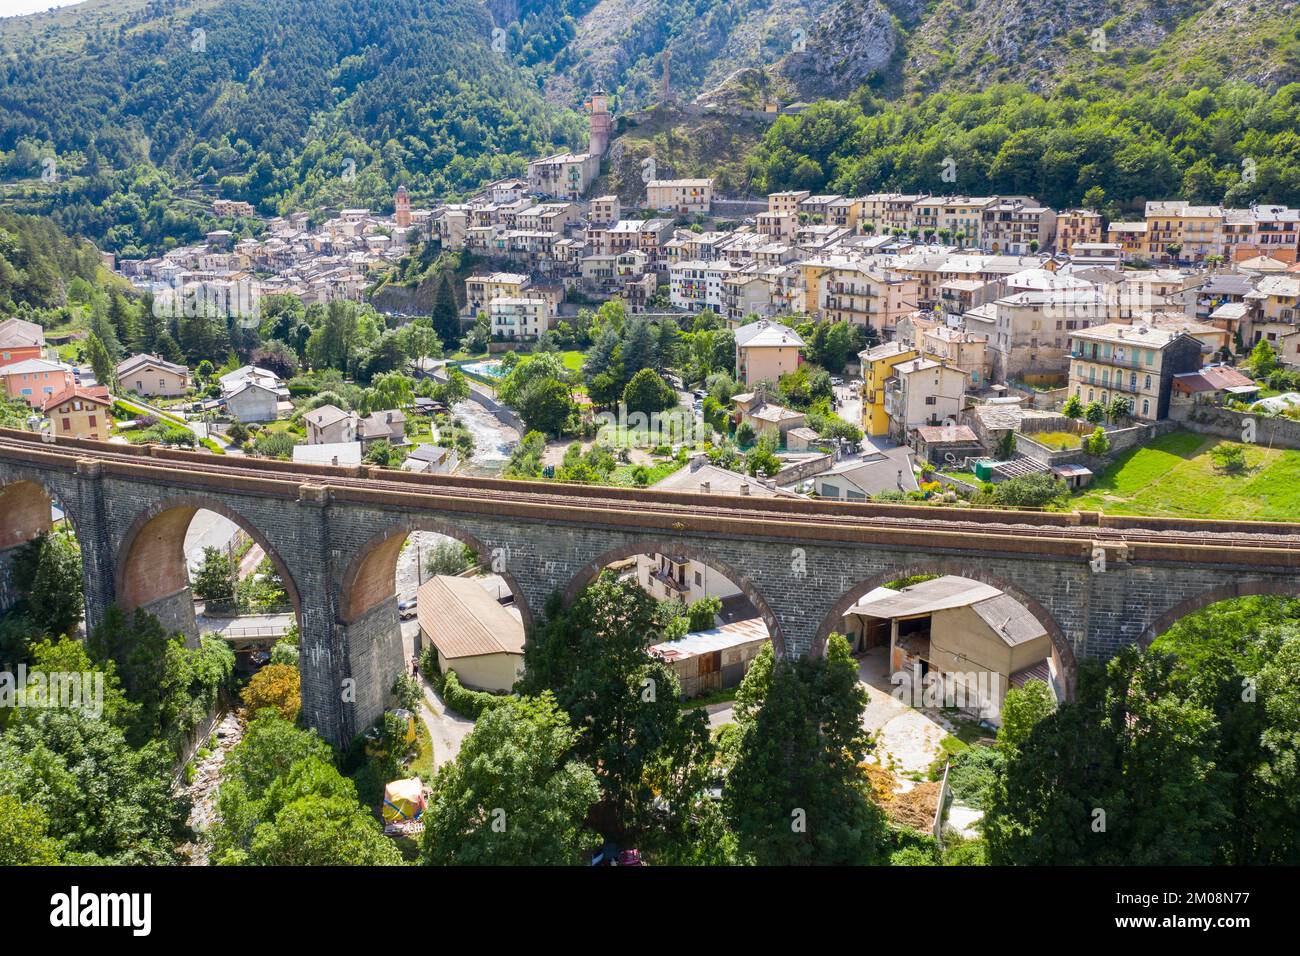 Aerial view of the mountain village of Tende in the Roya valley on the road between Ventimiglia on the coast and the Tende pass Col de Tende Alpes-Mar Stock Photo